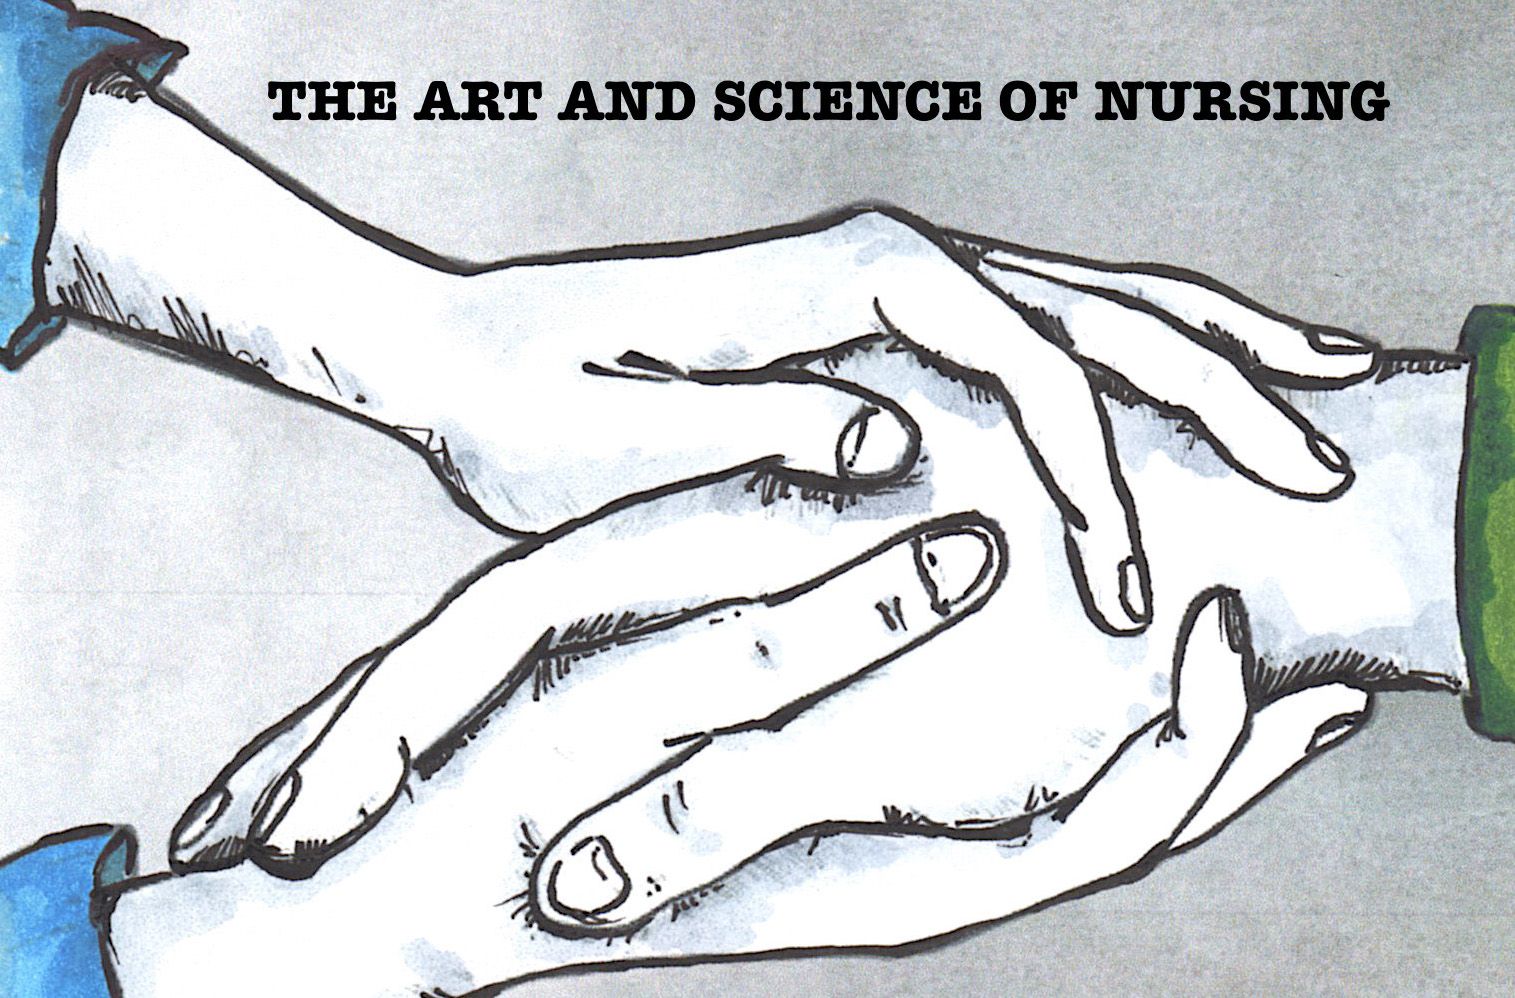 Drawing of a pair of hands holding another hand between them with the title The Art and Science of Nursing